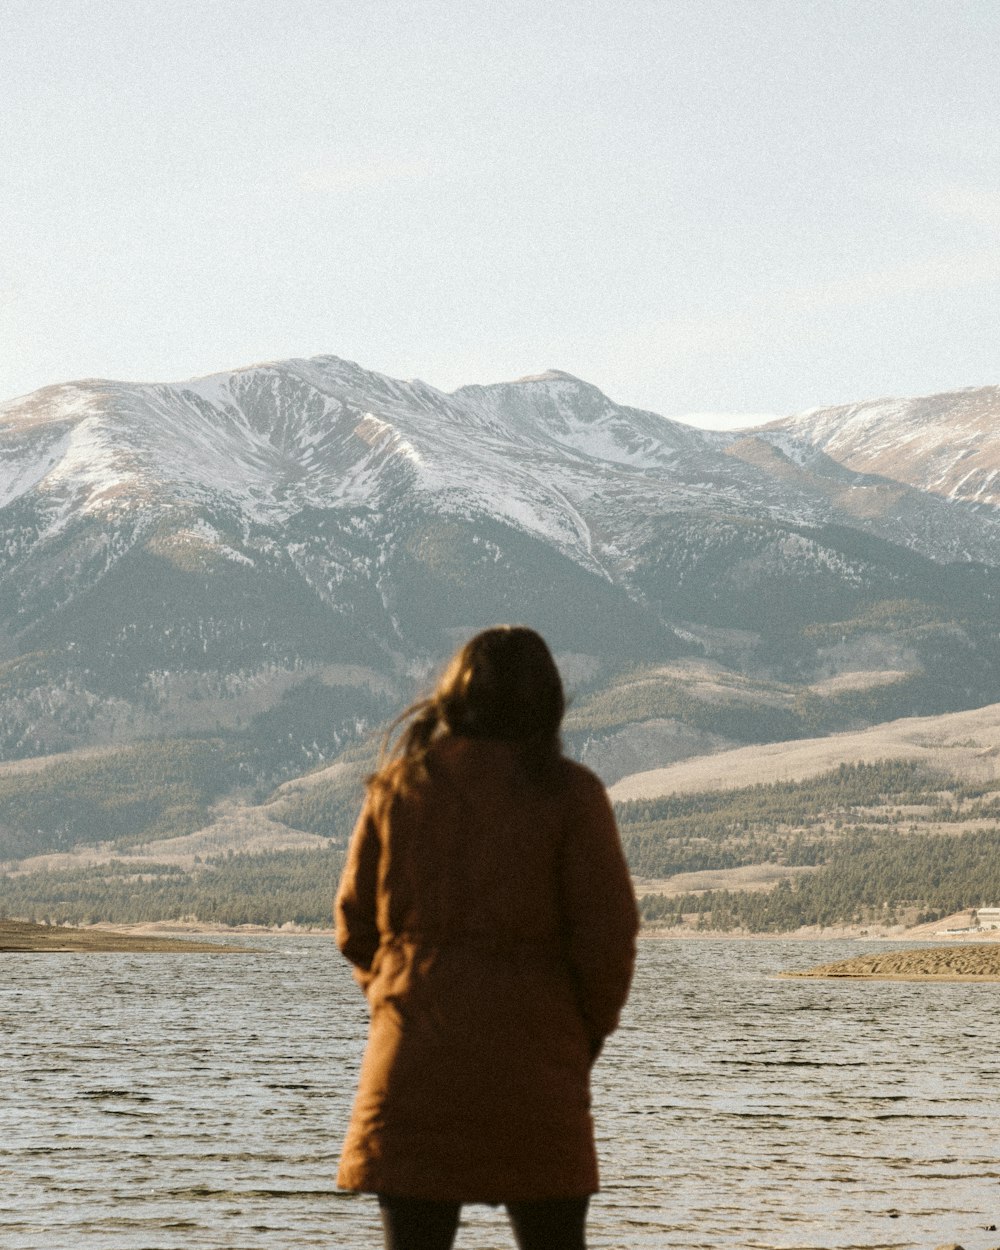 a person standing in front of a lake with a mountain in the background